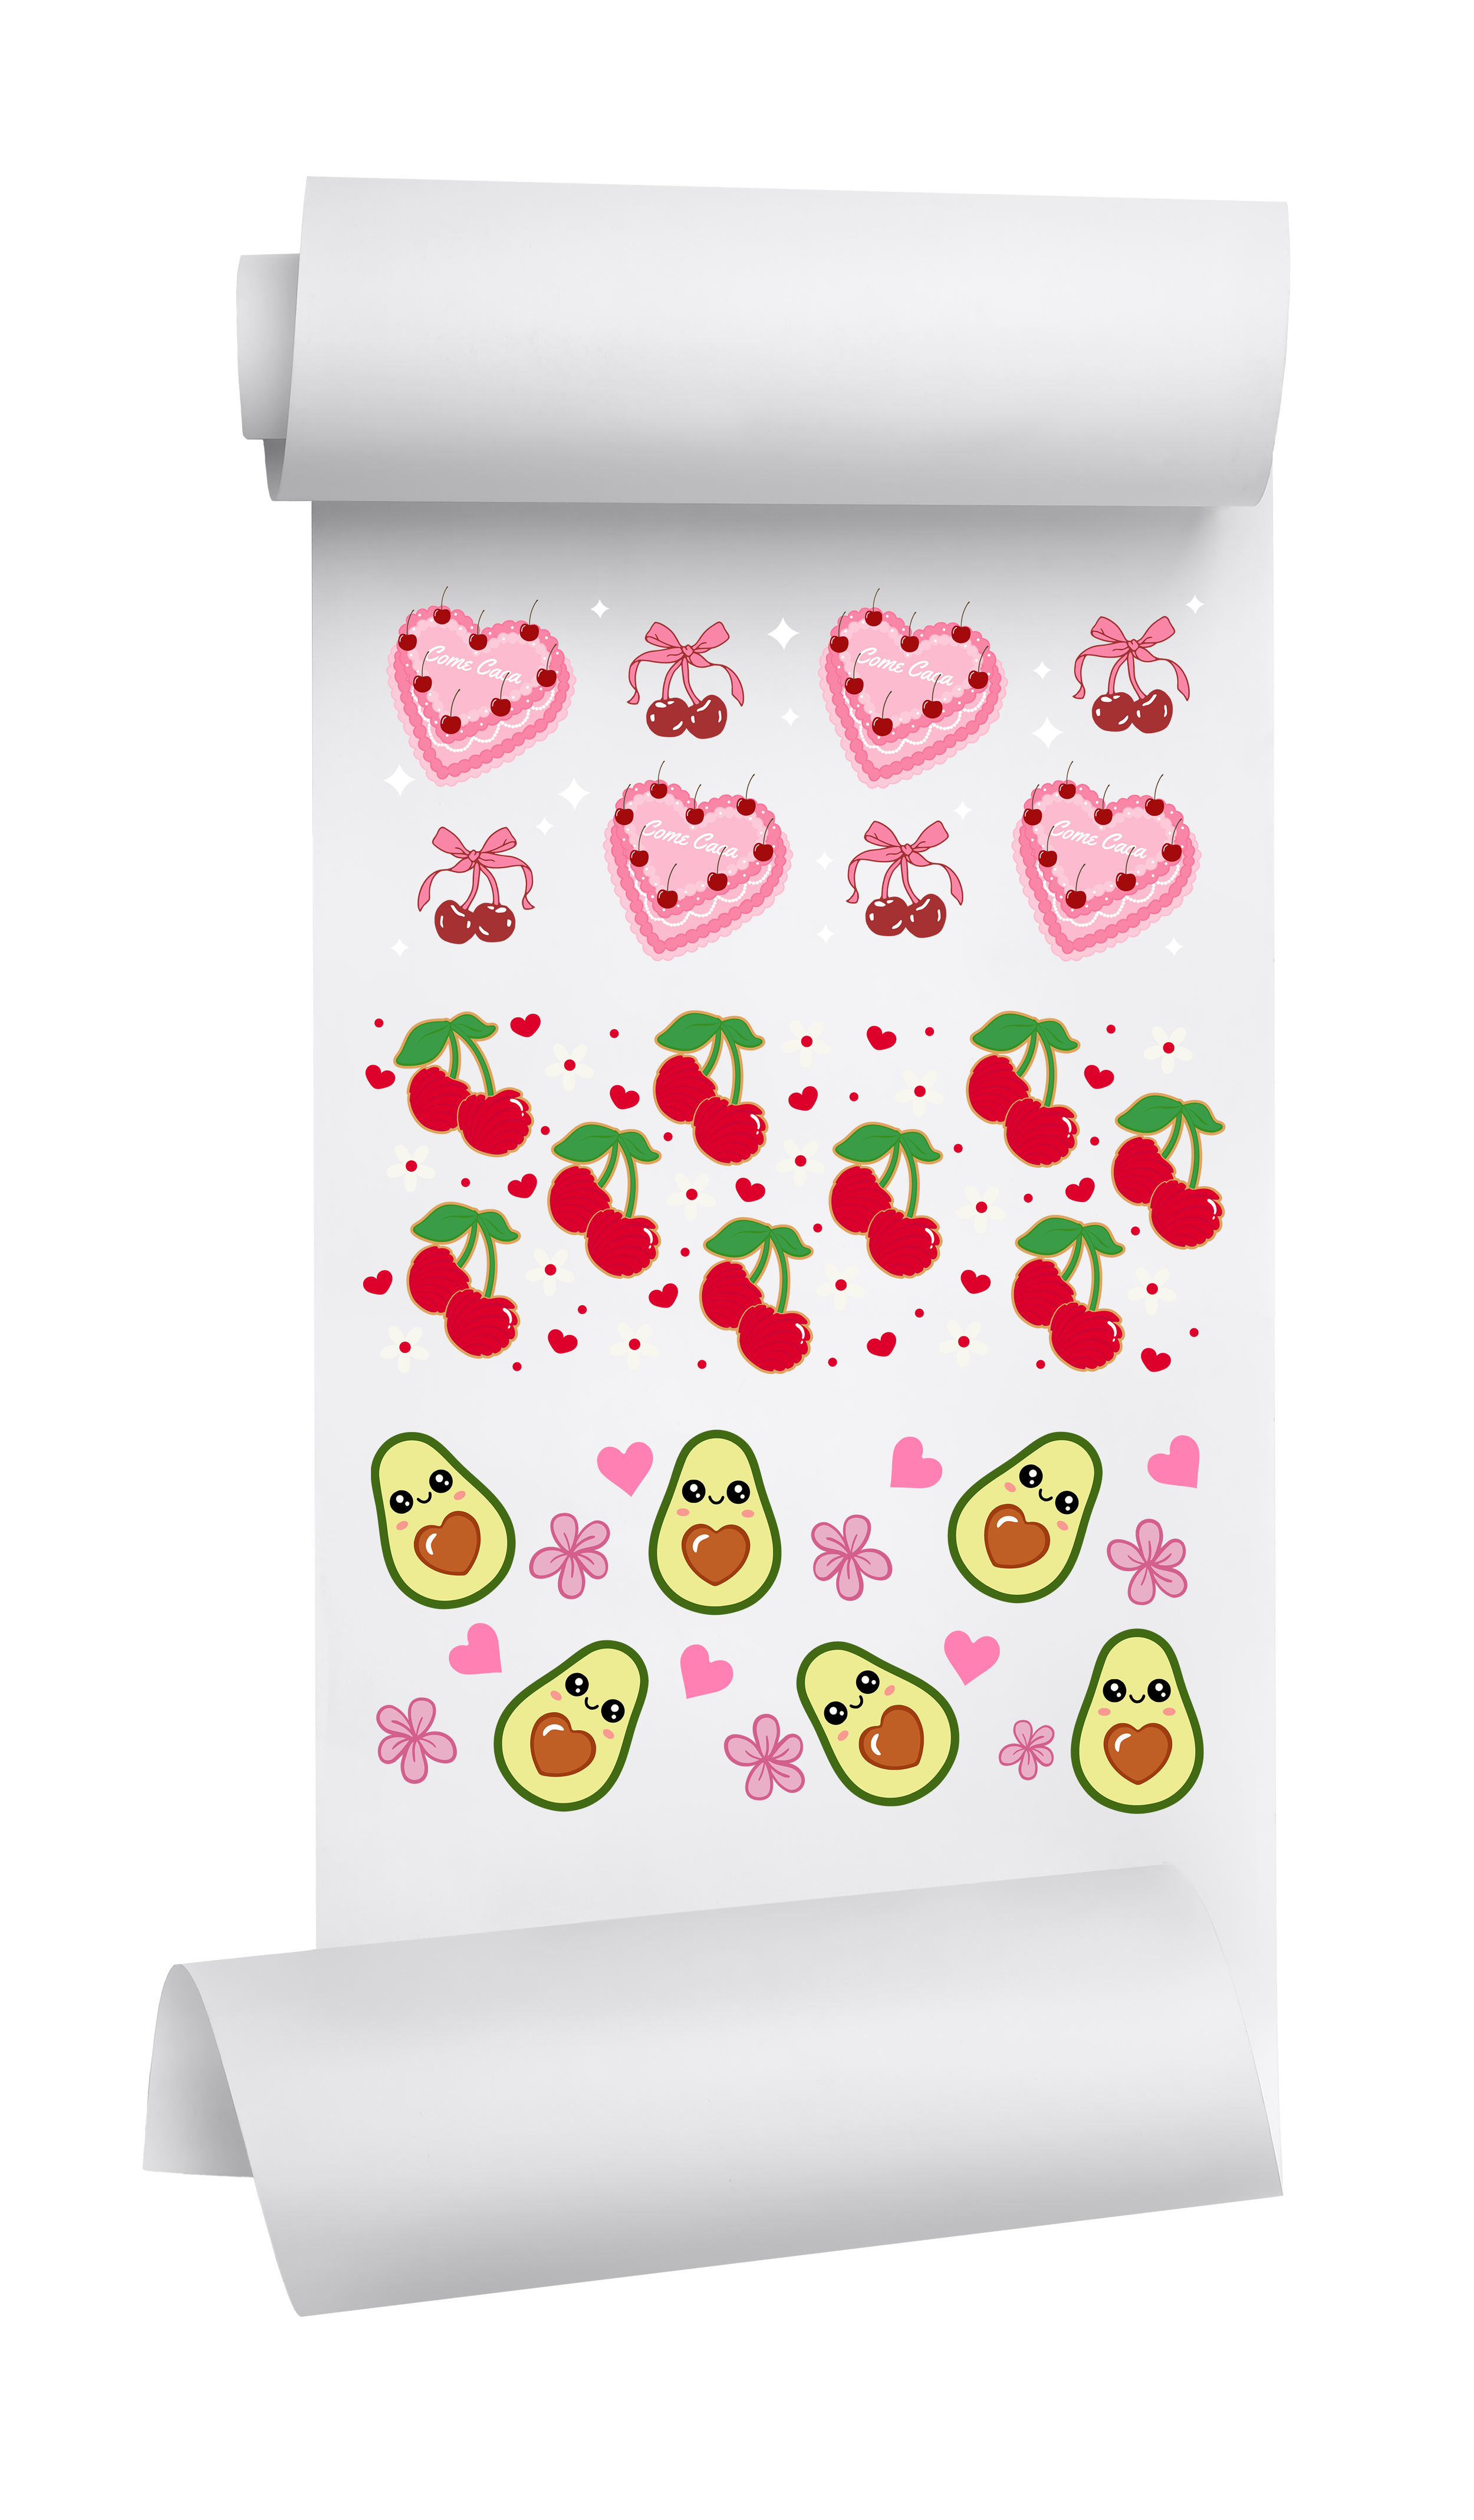 a wallpaper with cartoon fruits and hearts